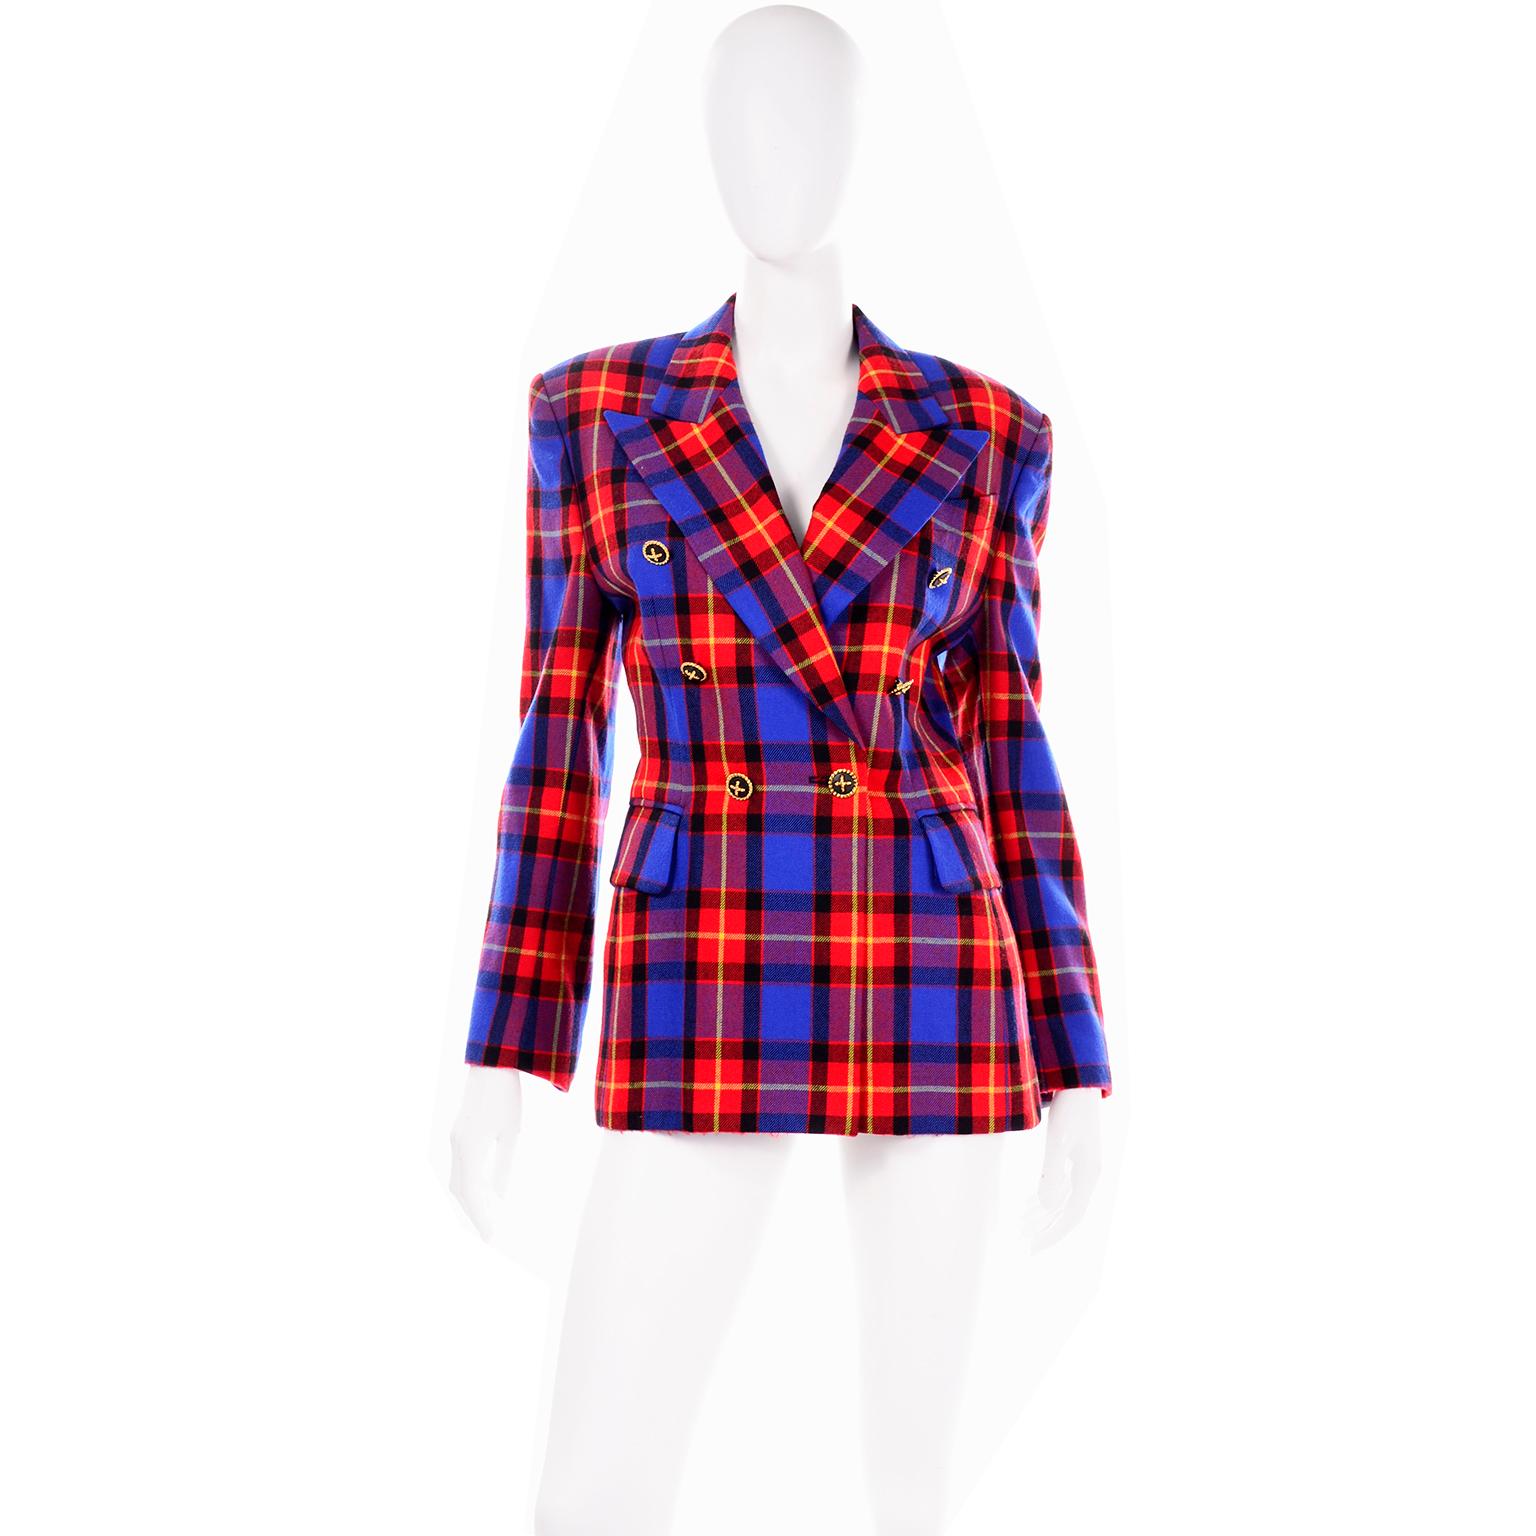 This is a lovely 1980's vintage red and blue plaid wool double breasted blazer from Escada, designed by Margaretha Ley. If you are a client of ours, you already know how much we love vintage Escada pieces!  They were so beautifully made and the